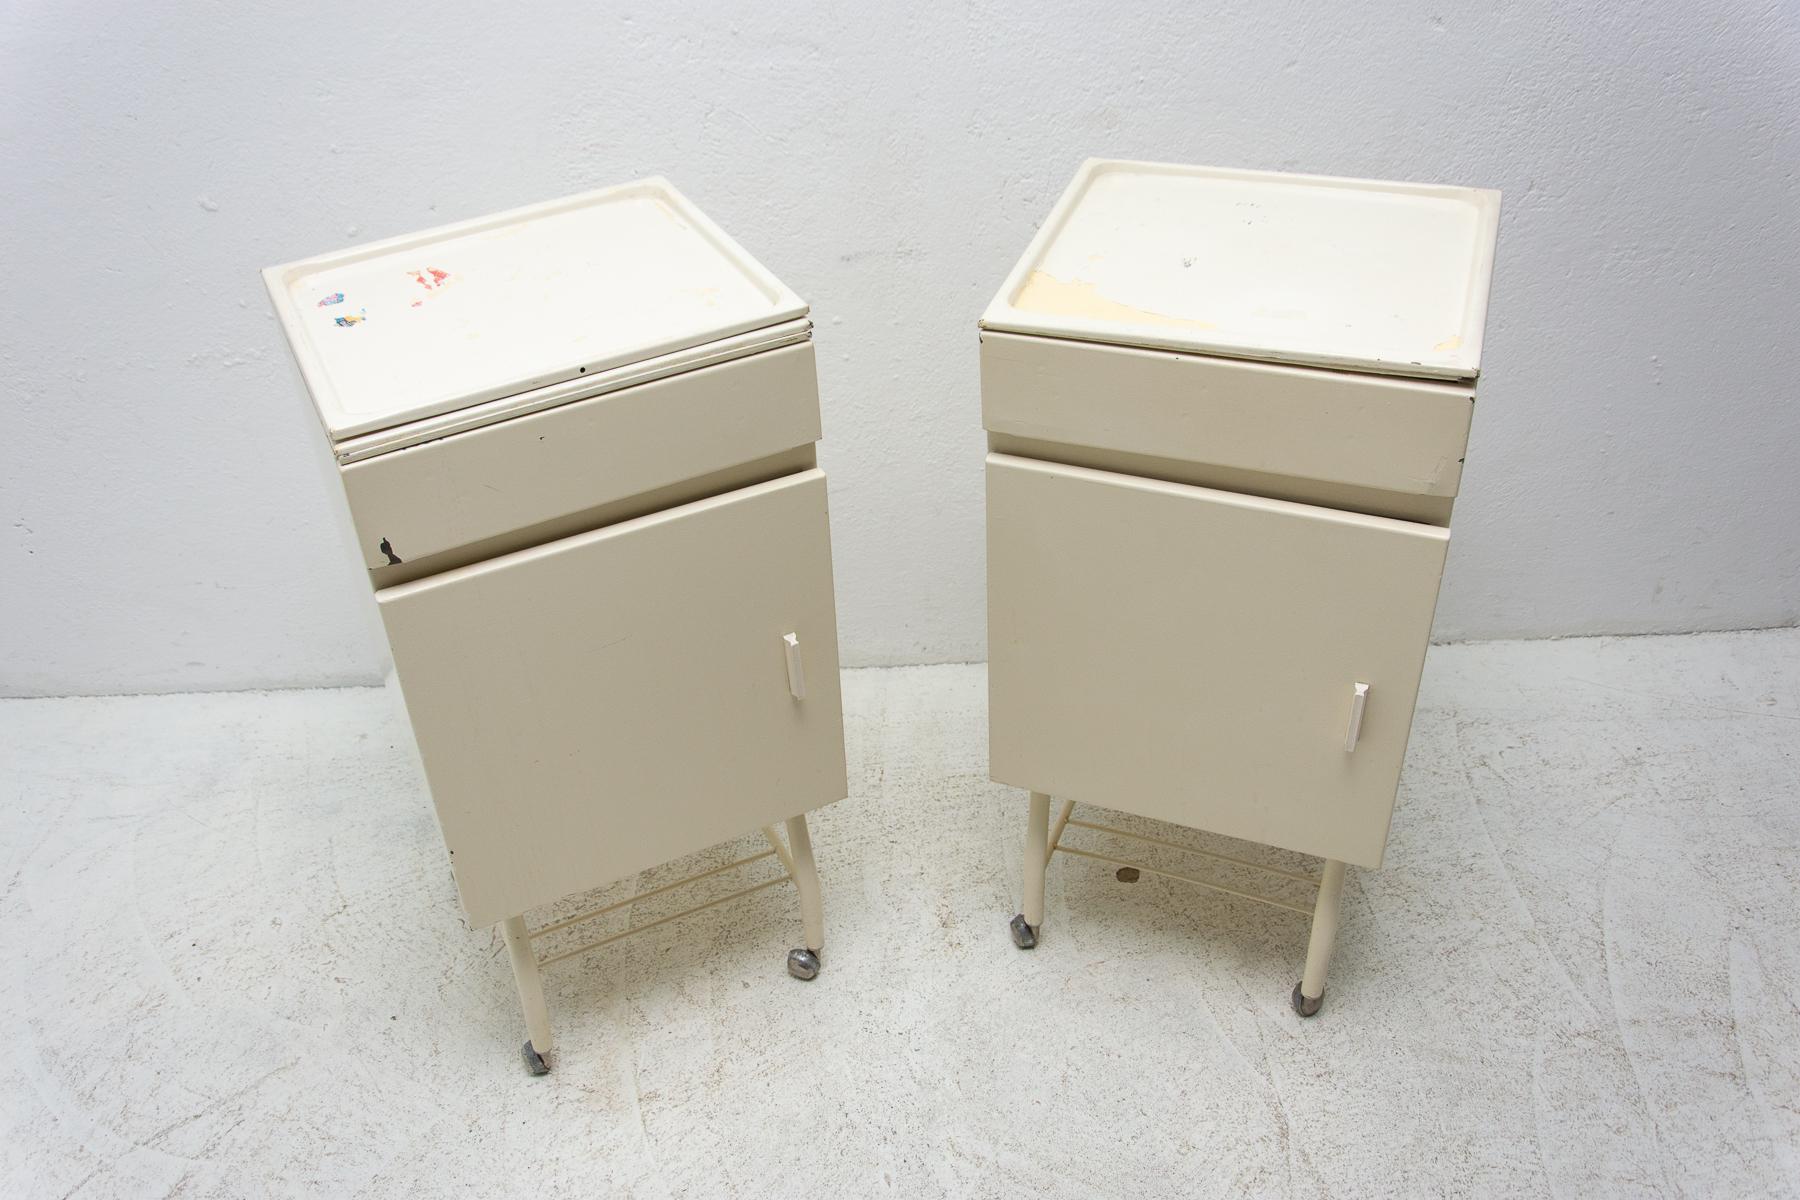 Pair of Tin Industrial Bedside Tables, 1970s, Czechoslovakia For Sale 1